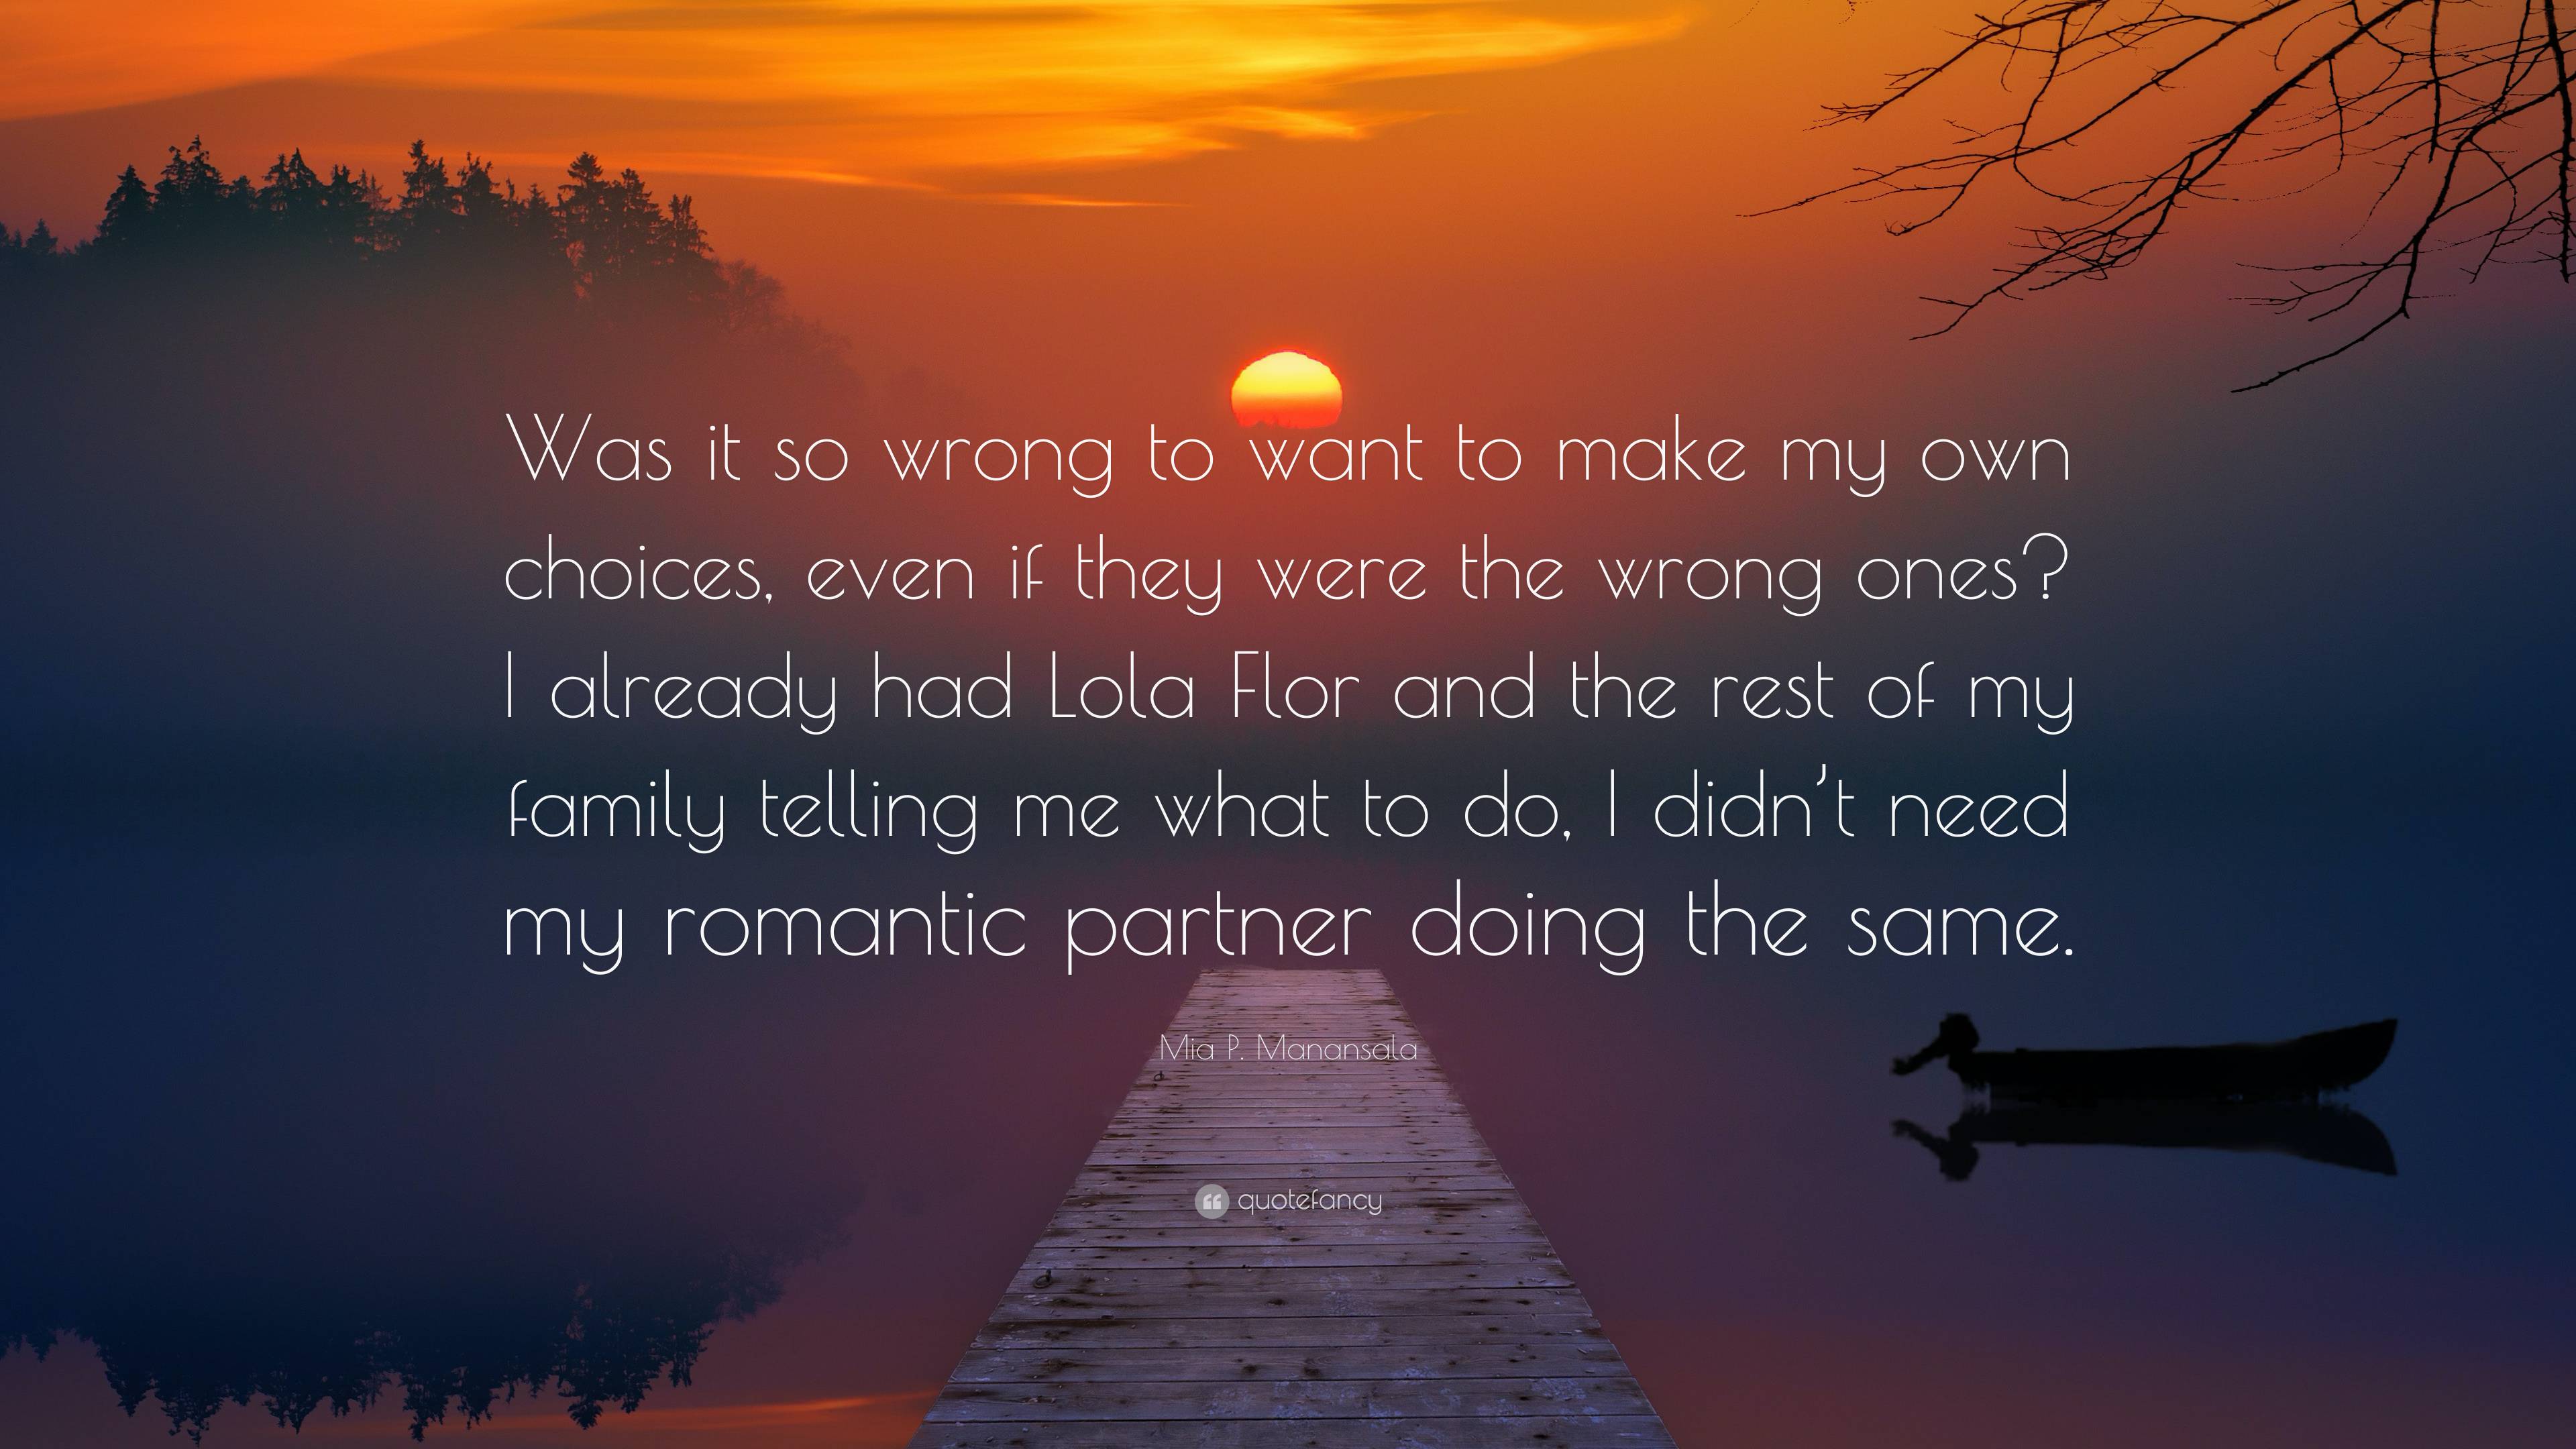 Mia P. Manansala Quote: “Was it so wrong to want to make my own choices ...